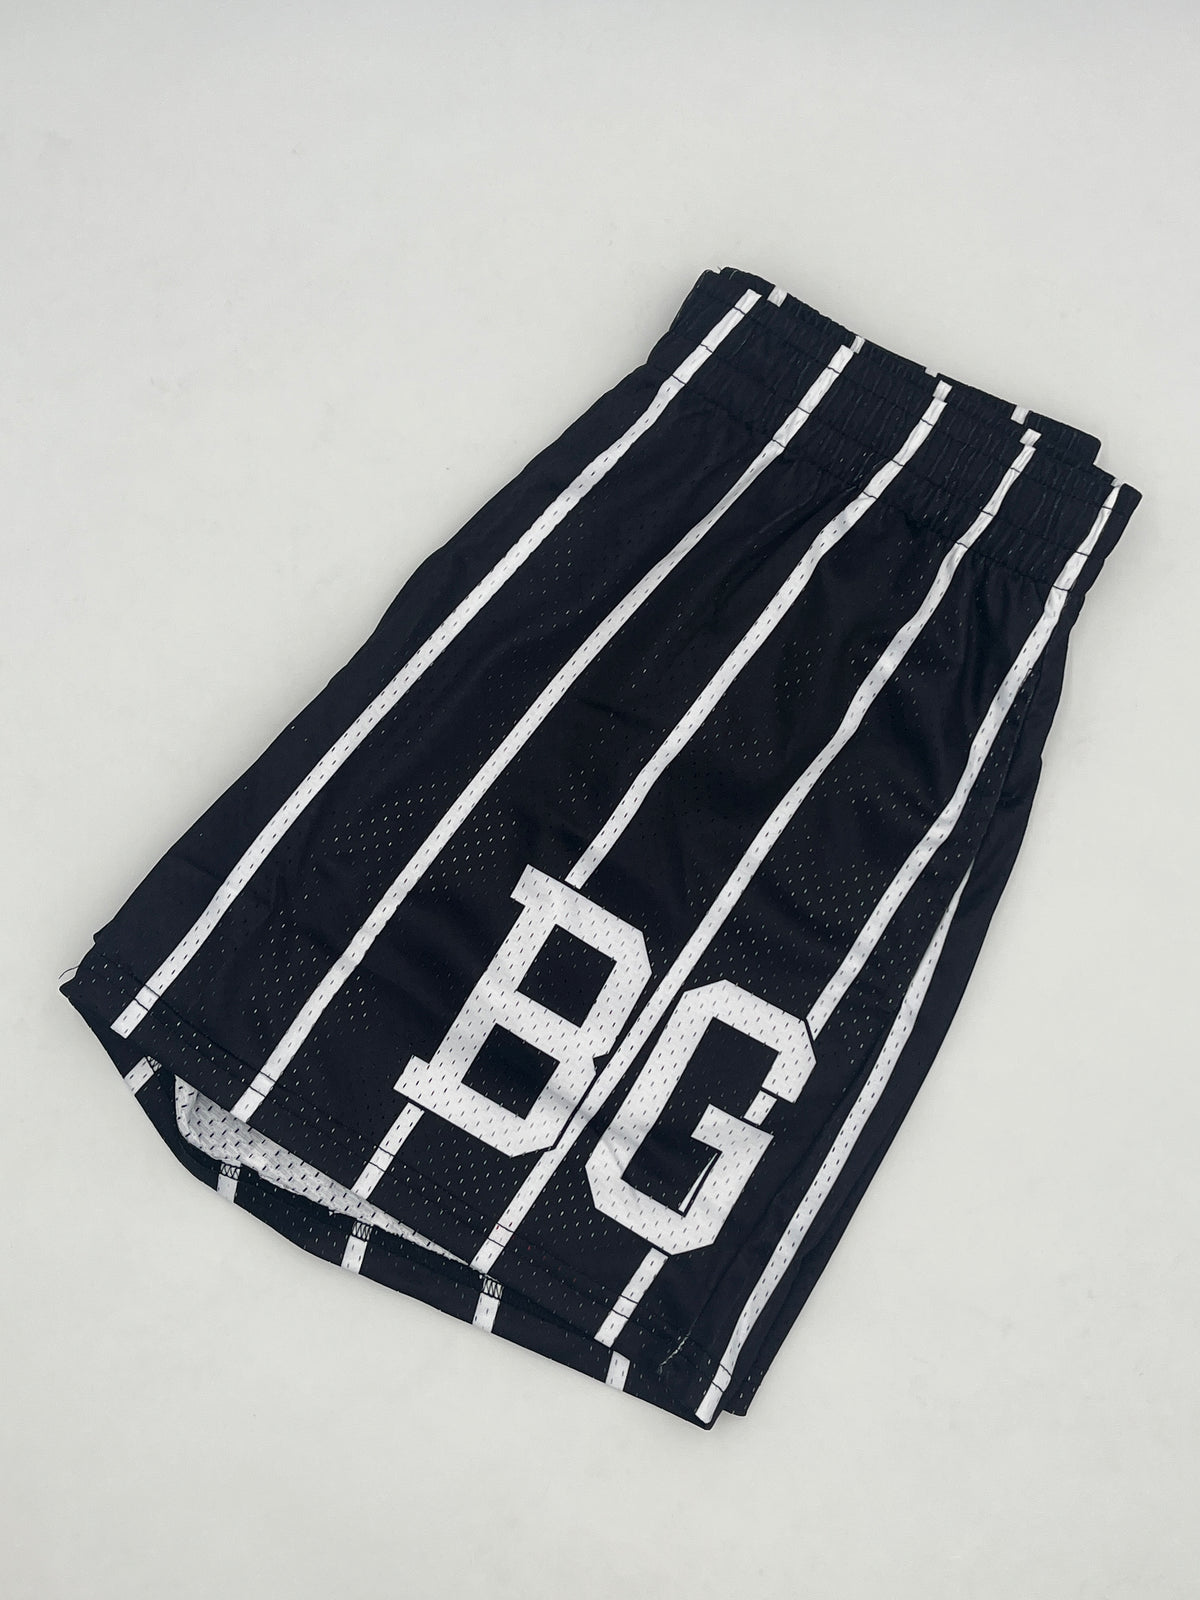 Brother Gee X New Bara Shorts